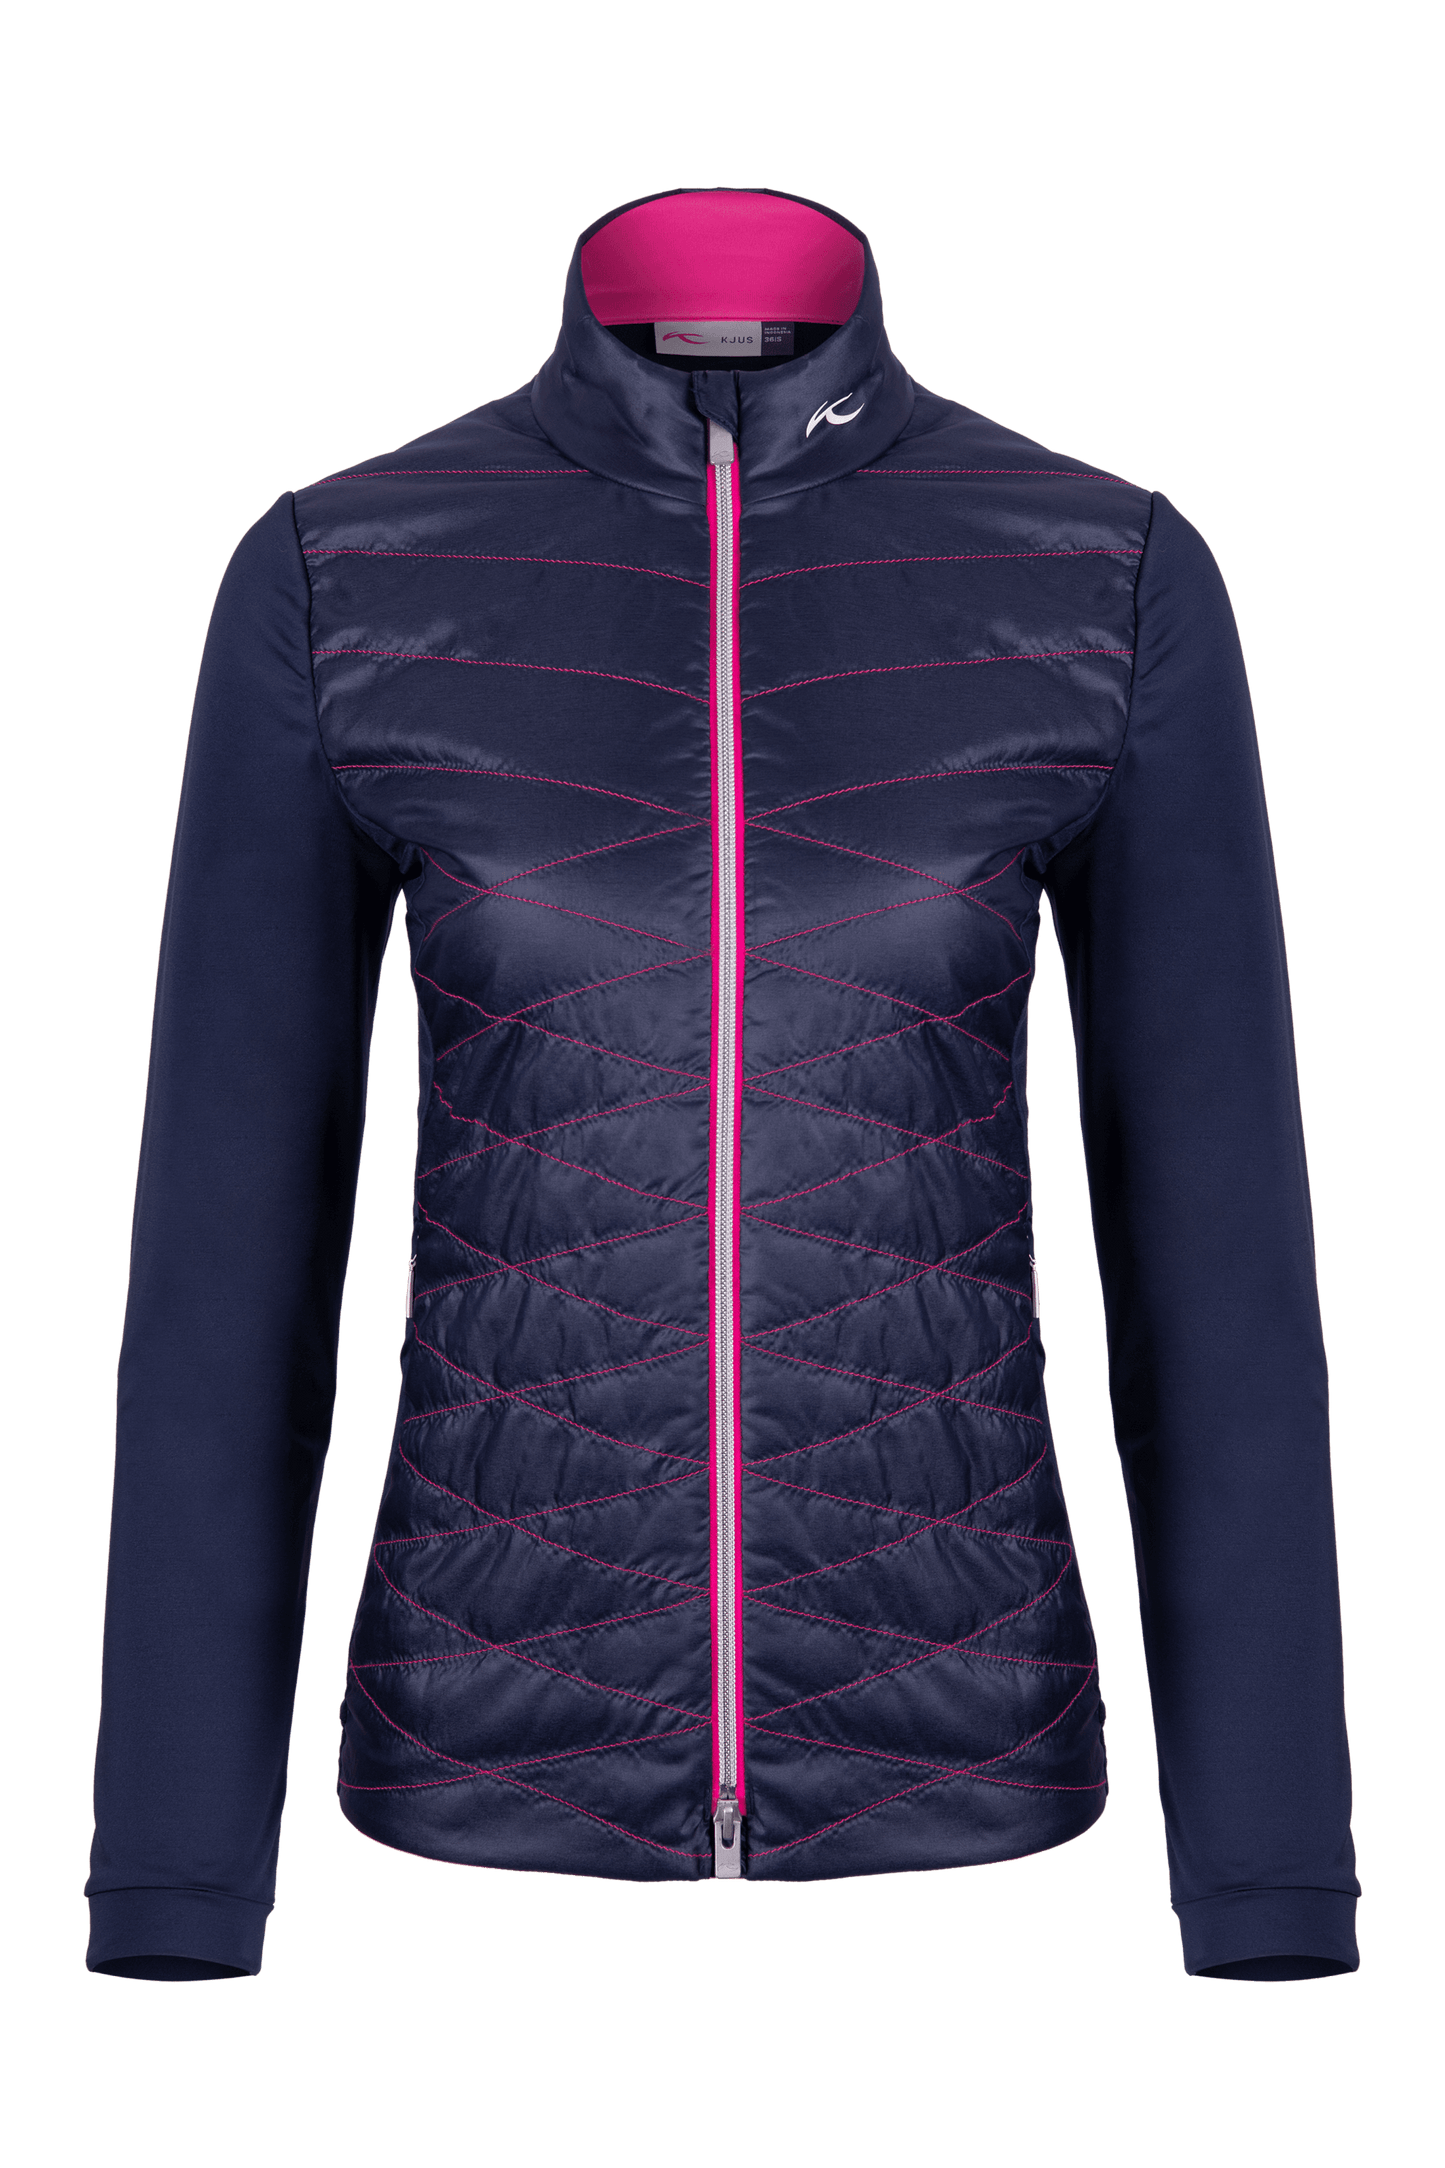 Women Retention Jacket by Kjus - The Luxury Promotional Gifts Company Limited